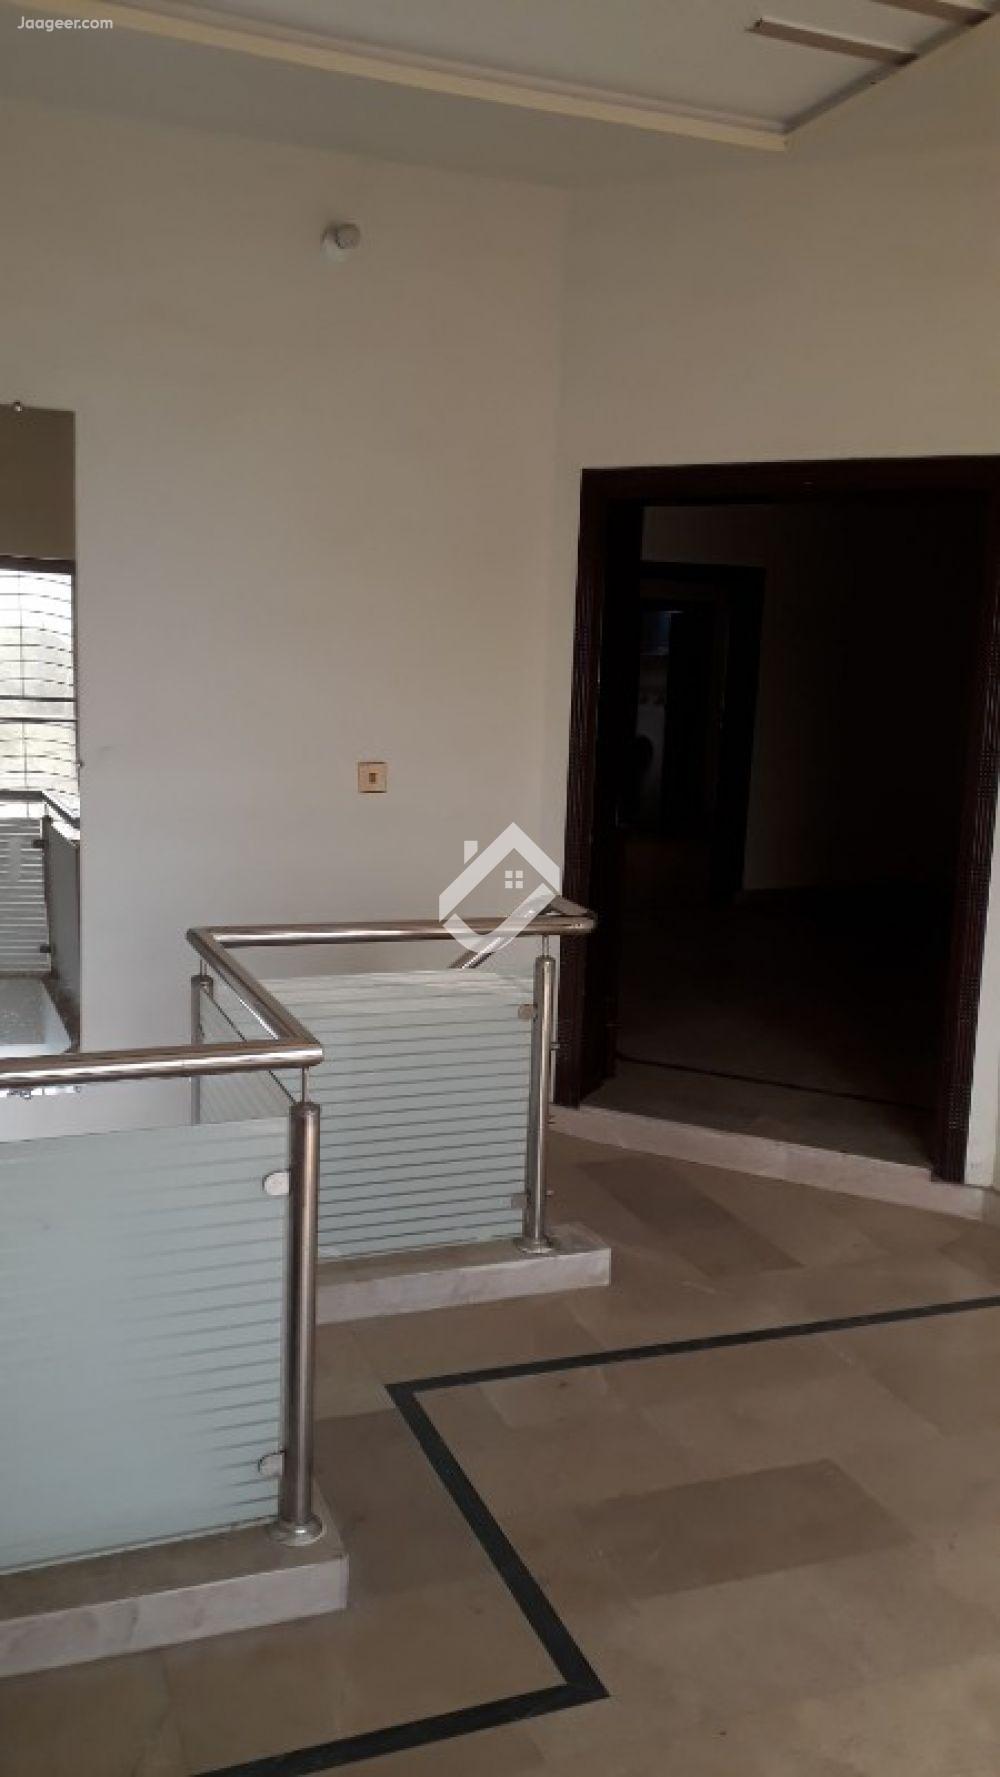 View  5 Marla Double Storey House For Rent In Officers Colony in Officers Colony, Sargodha